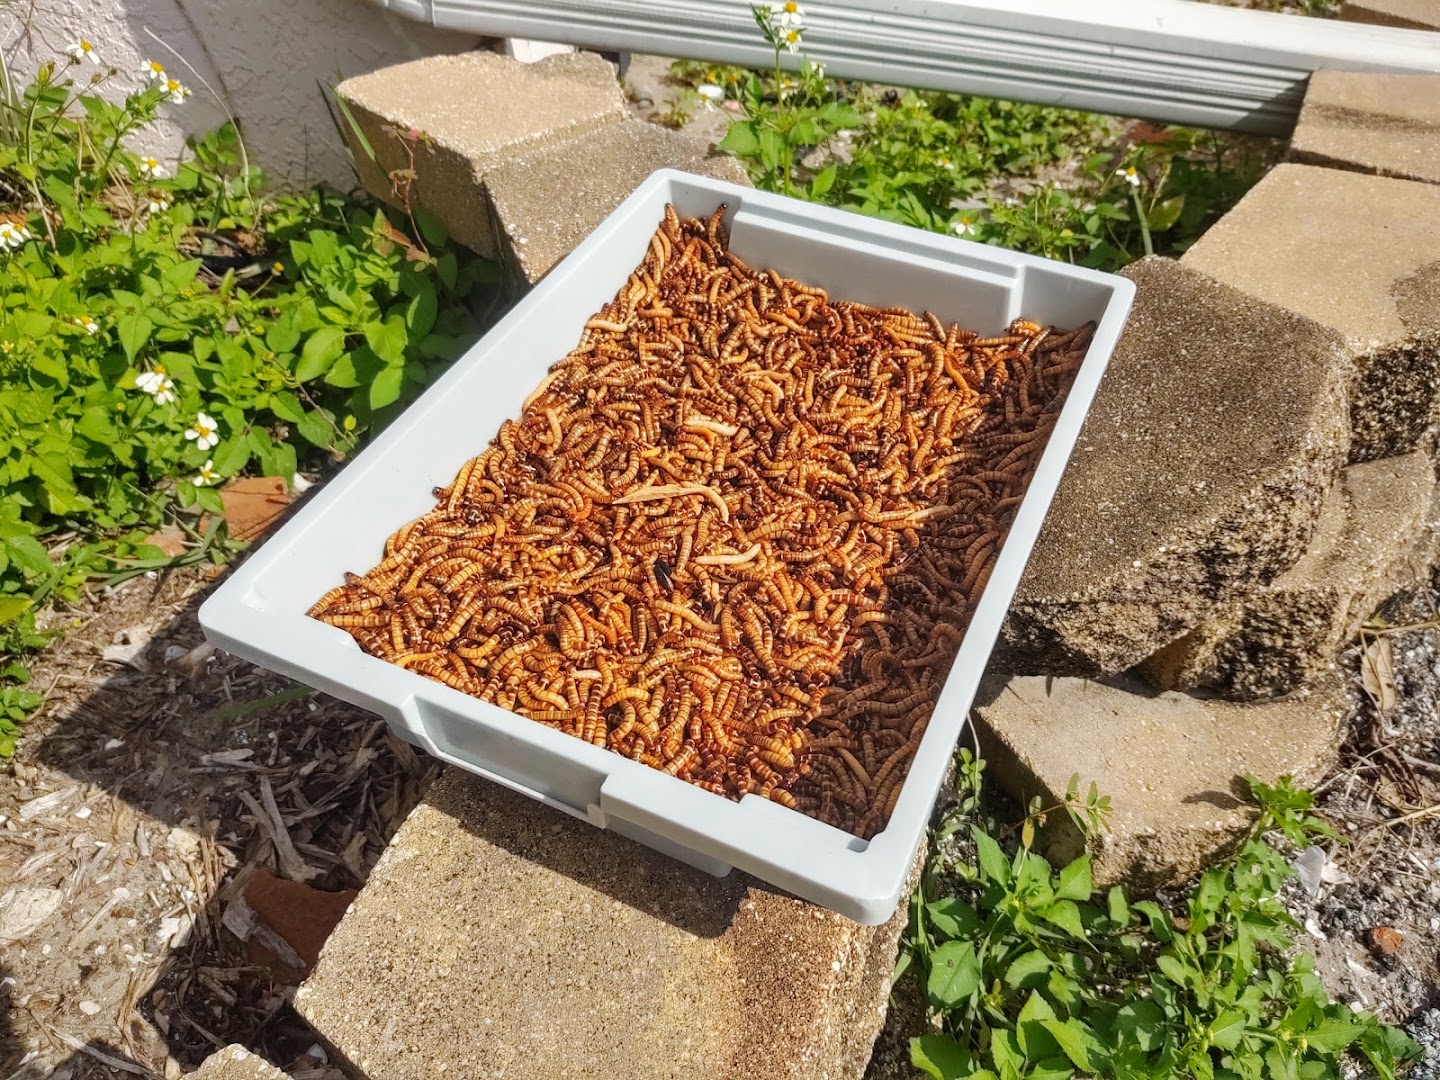 Many Mealworms!